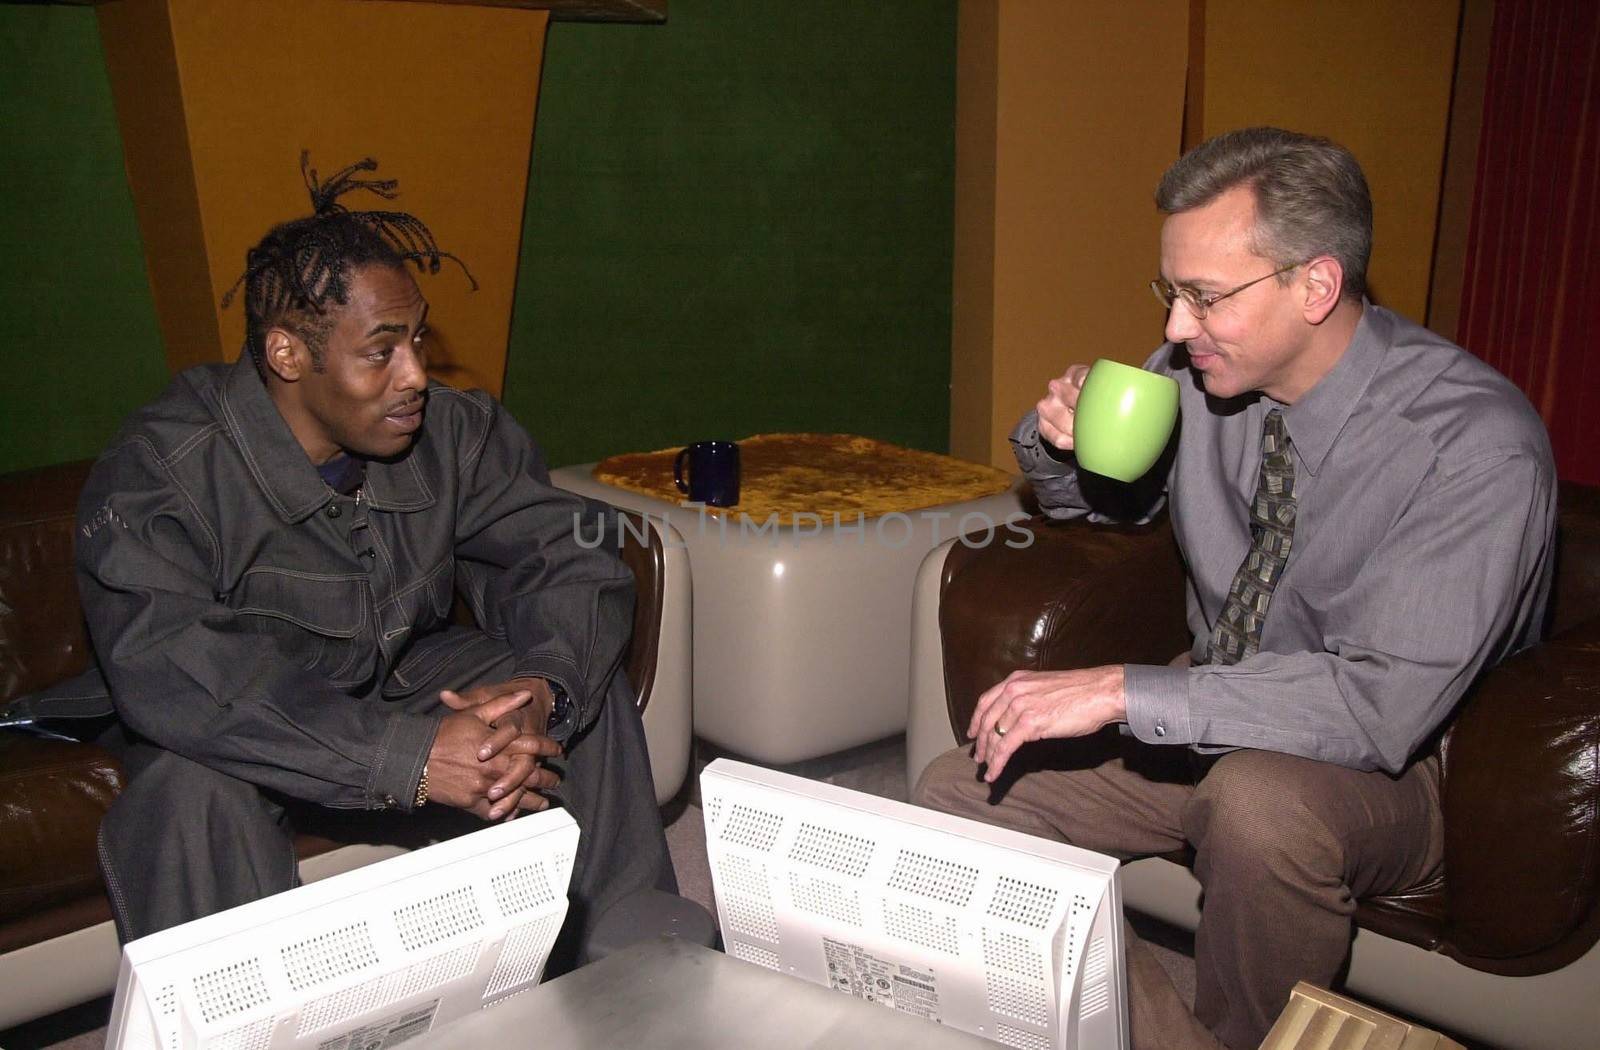 Coolio on Dr. Drew by ImageCollect